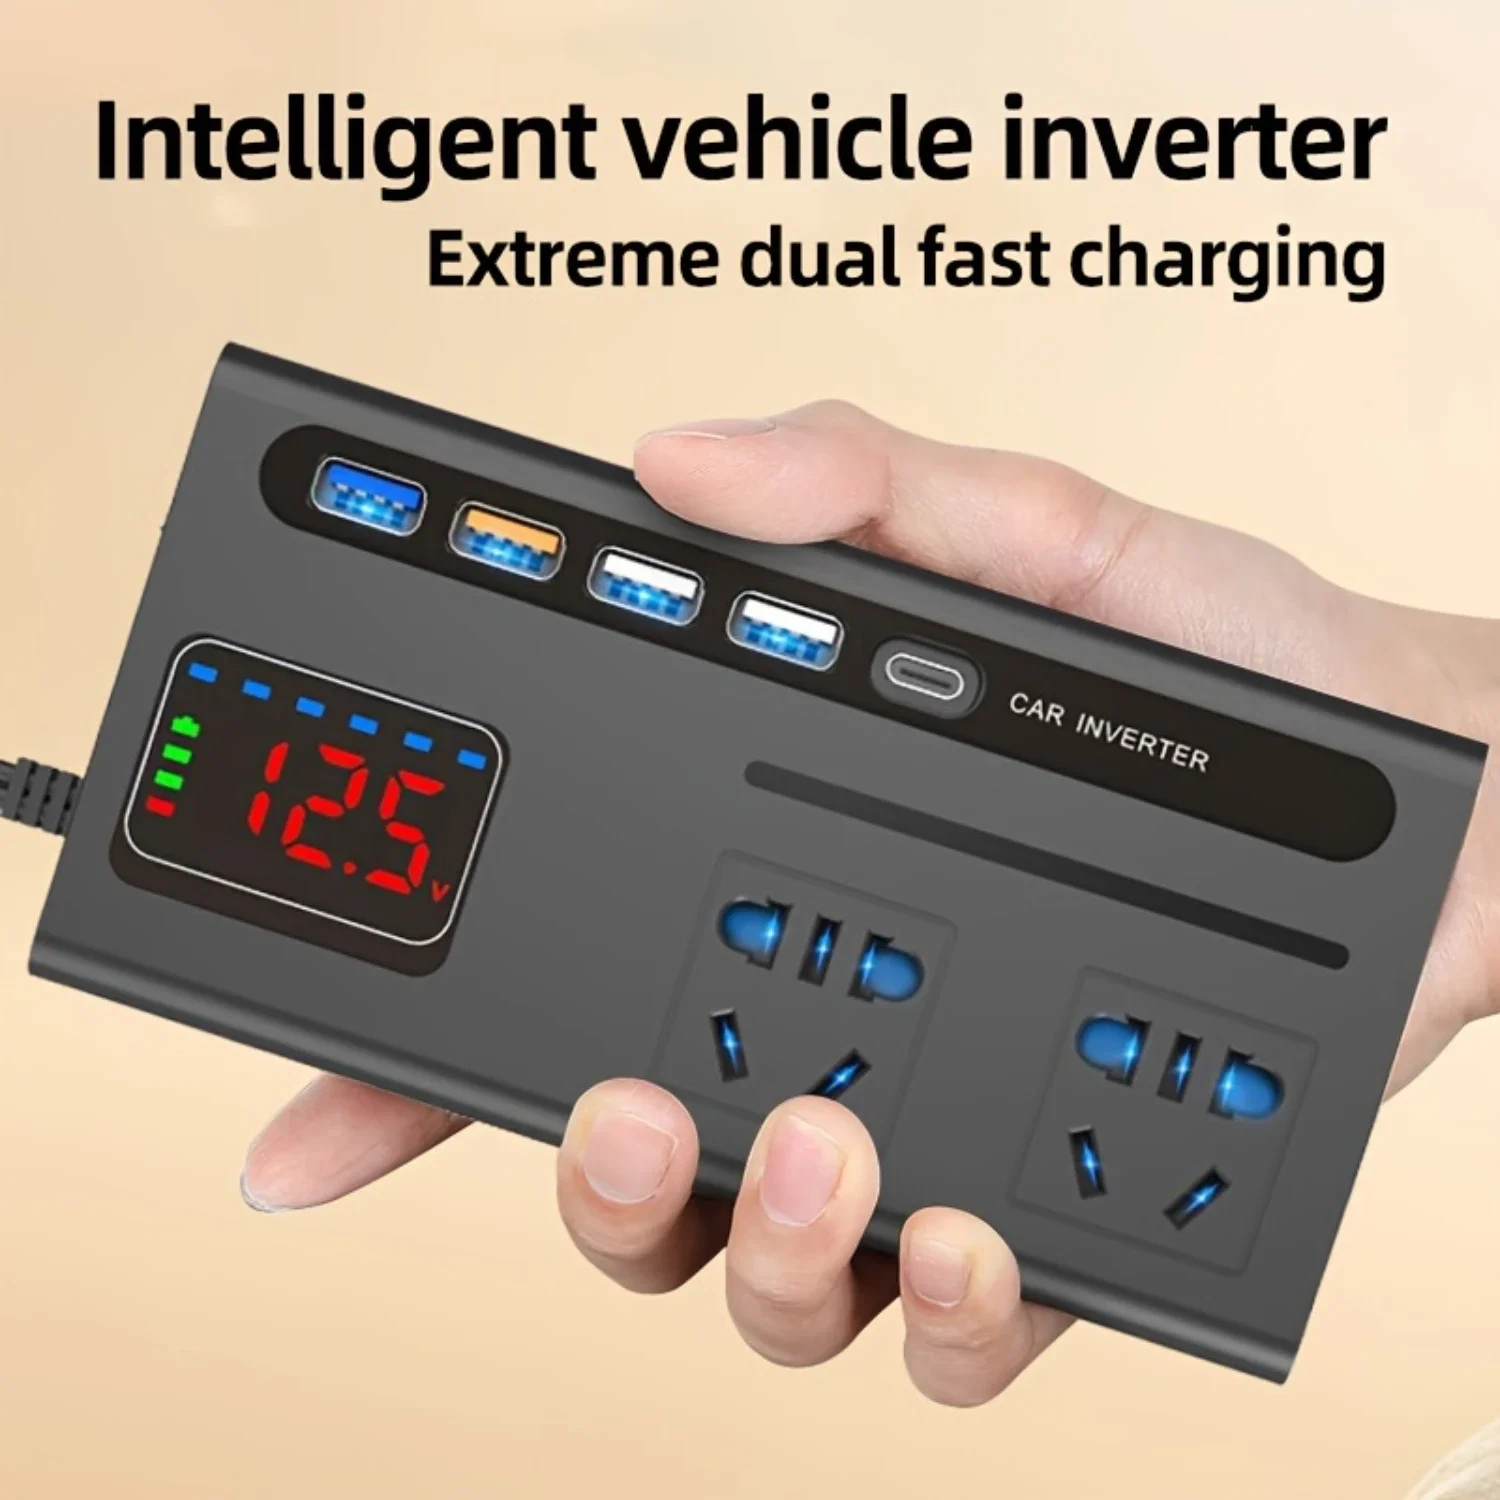 

Powerful 200W Car Inverter with LED Display, Fast Charging 12V to 110V & 24V to 220V Power Converter - 4 USB Ports, 1 PD Port fo